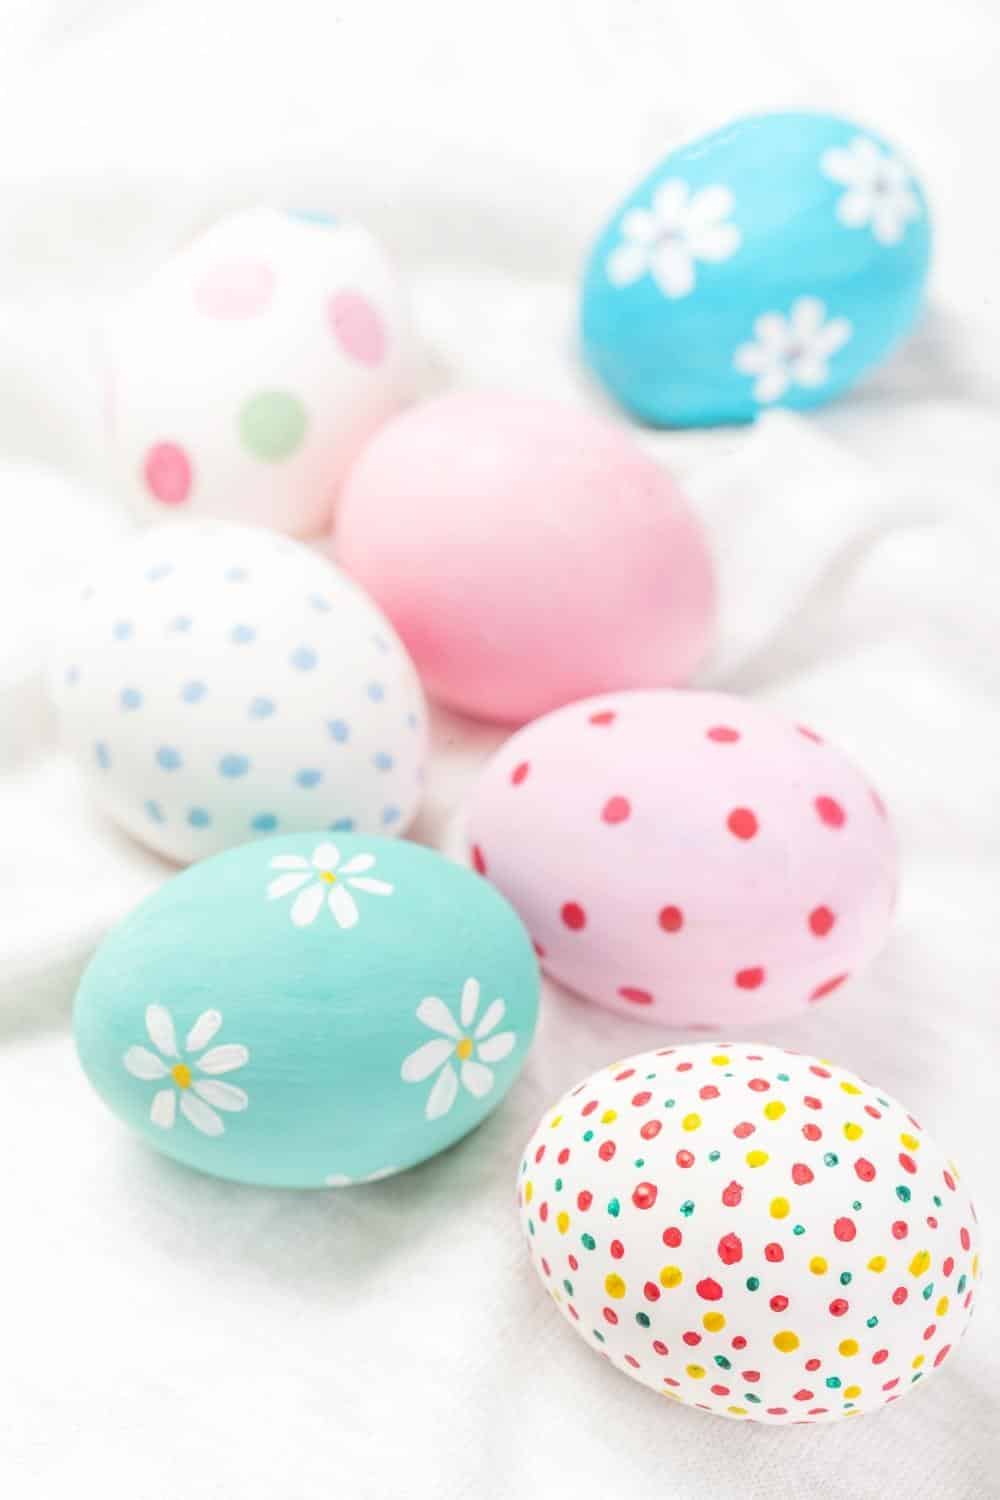 Closeup of 7 pastel decorated Easter eggs on a white surface.